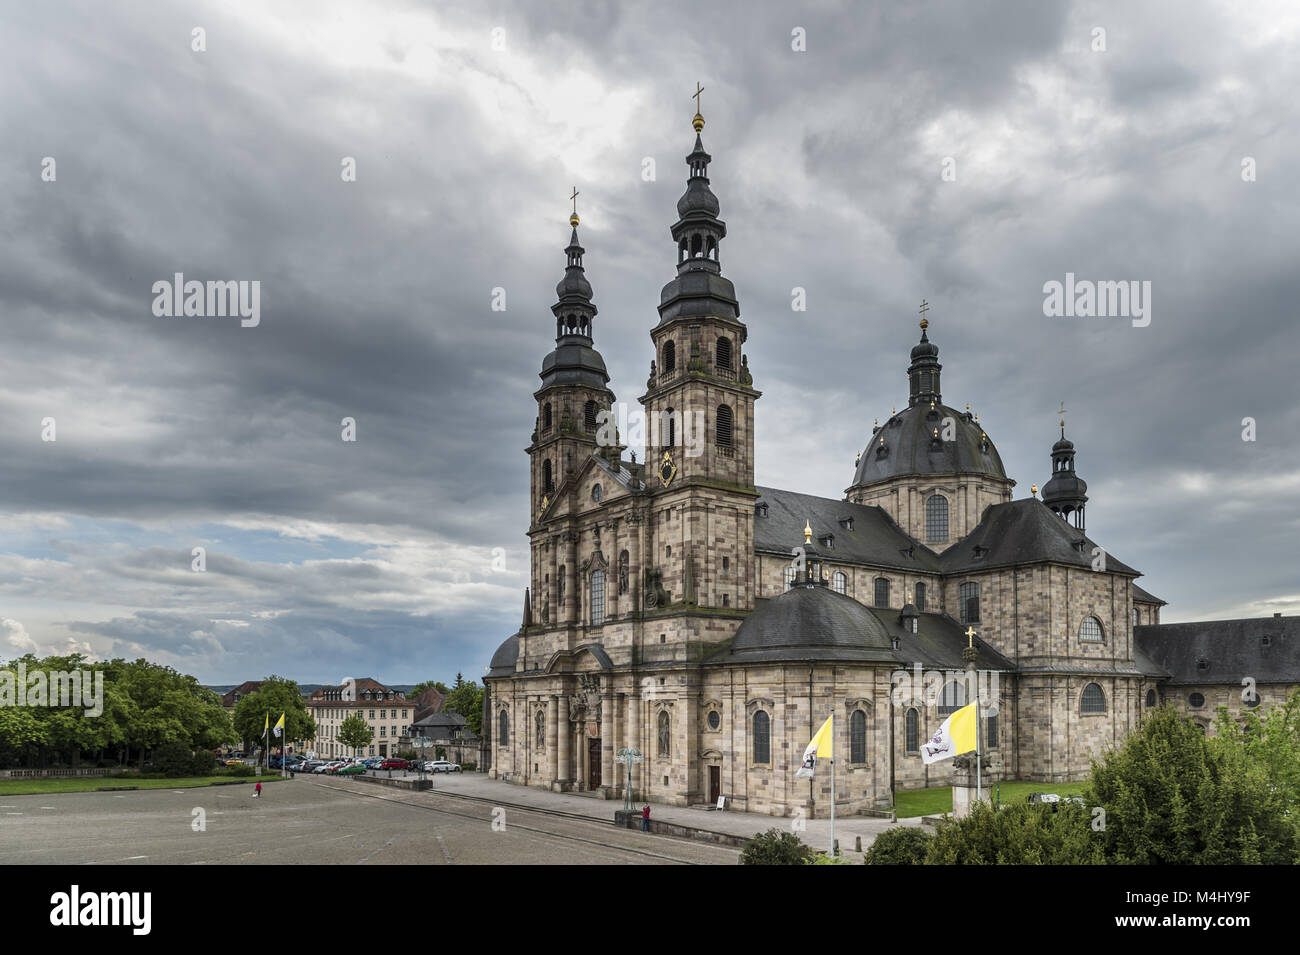 The Fulda Cathedral under dense clouds. Stock Photo